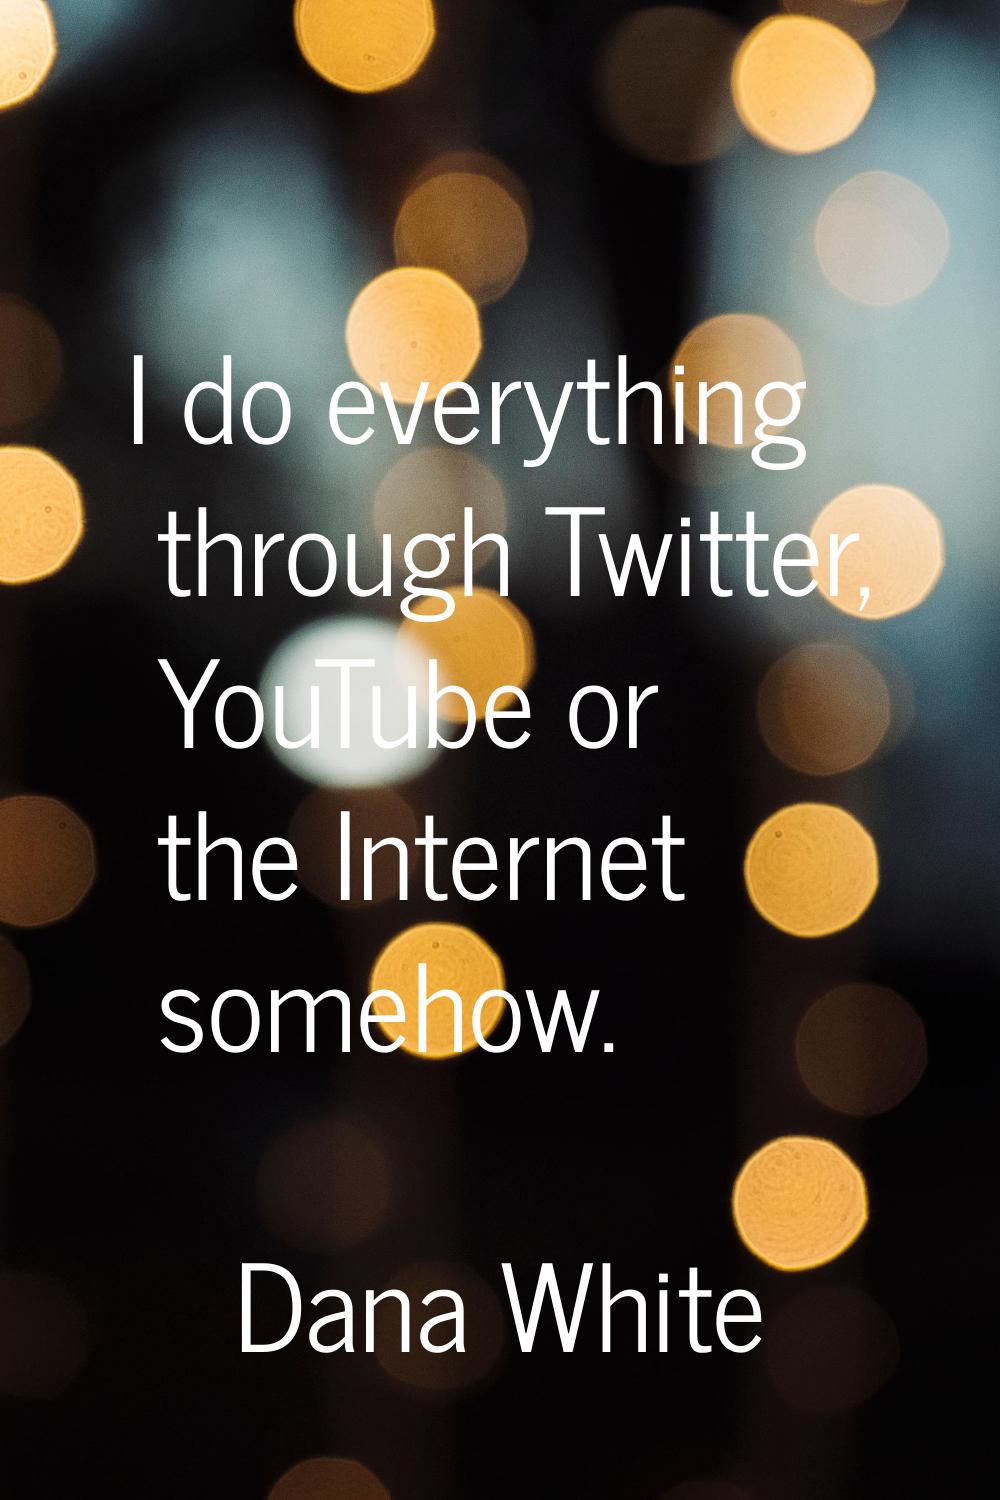 I do everything through Twitter, YouTube or the Internet somehow.